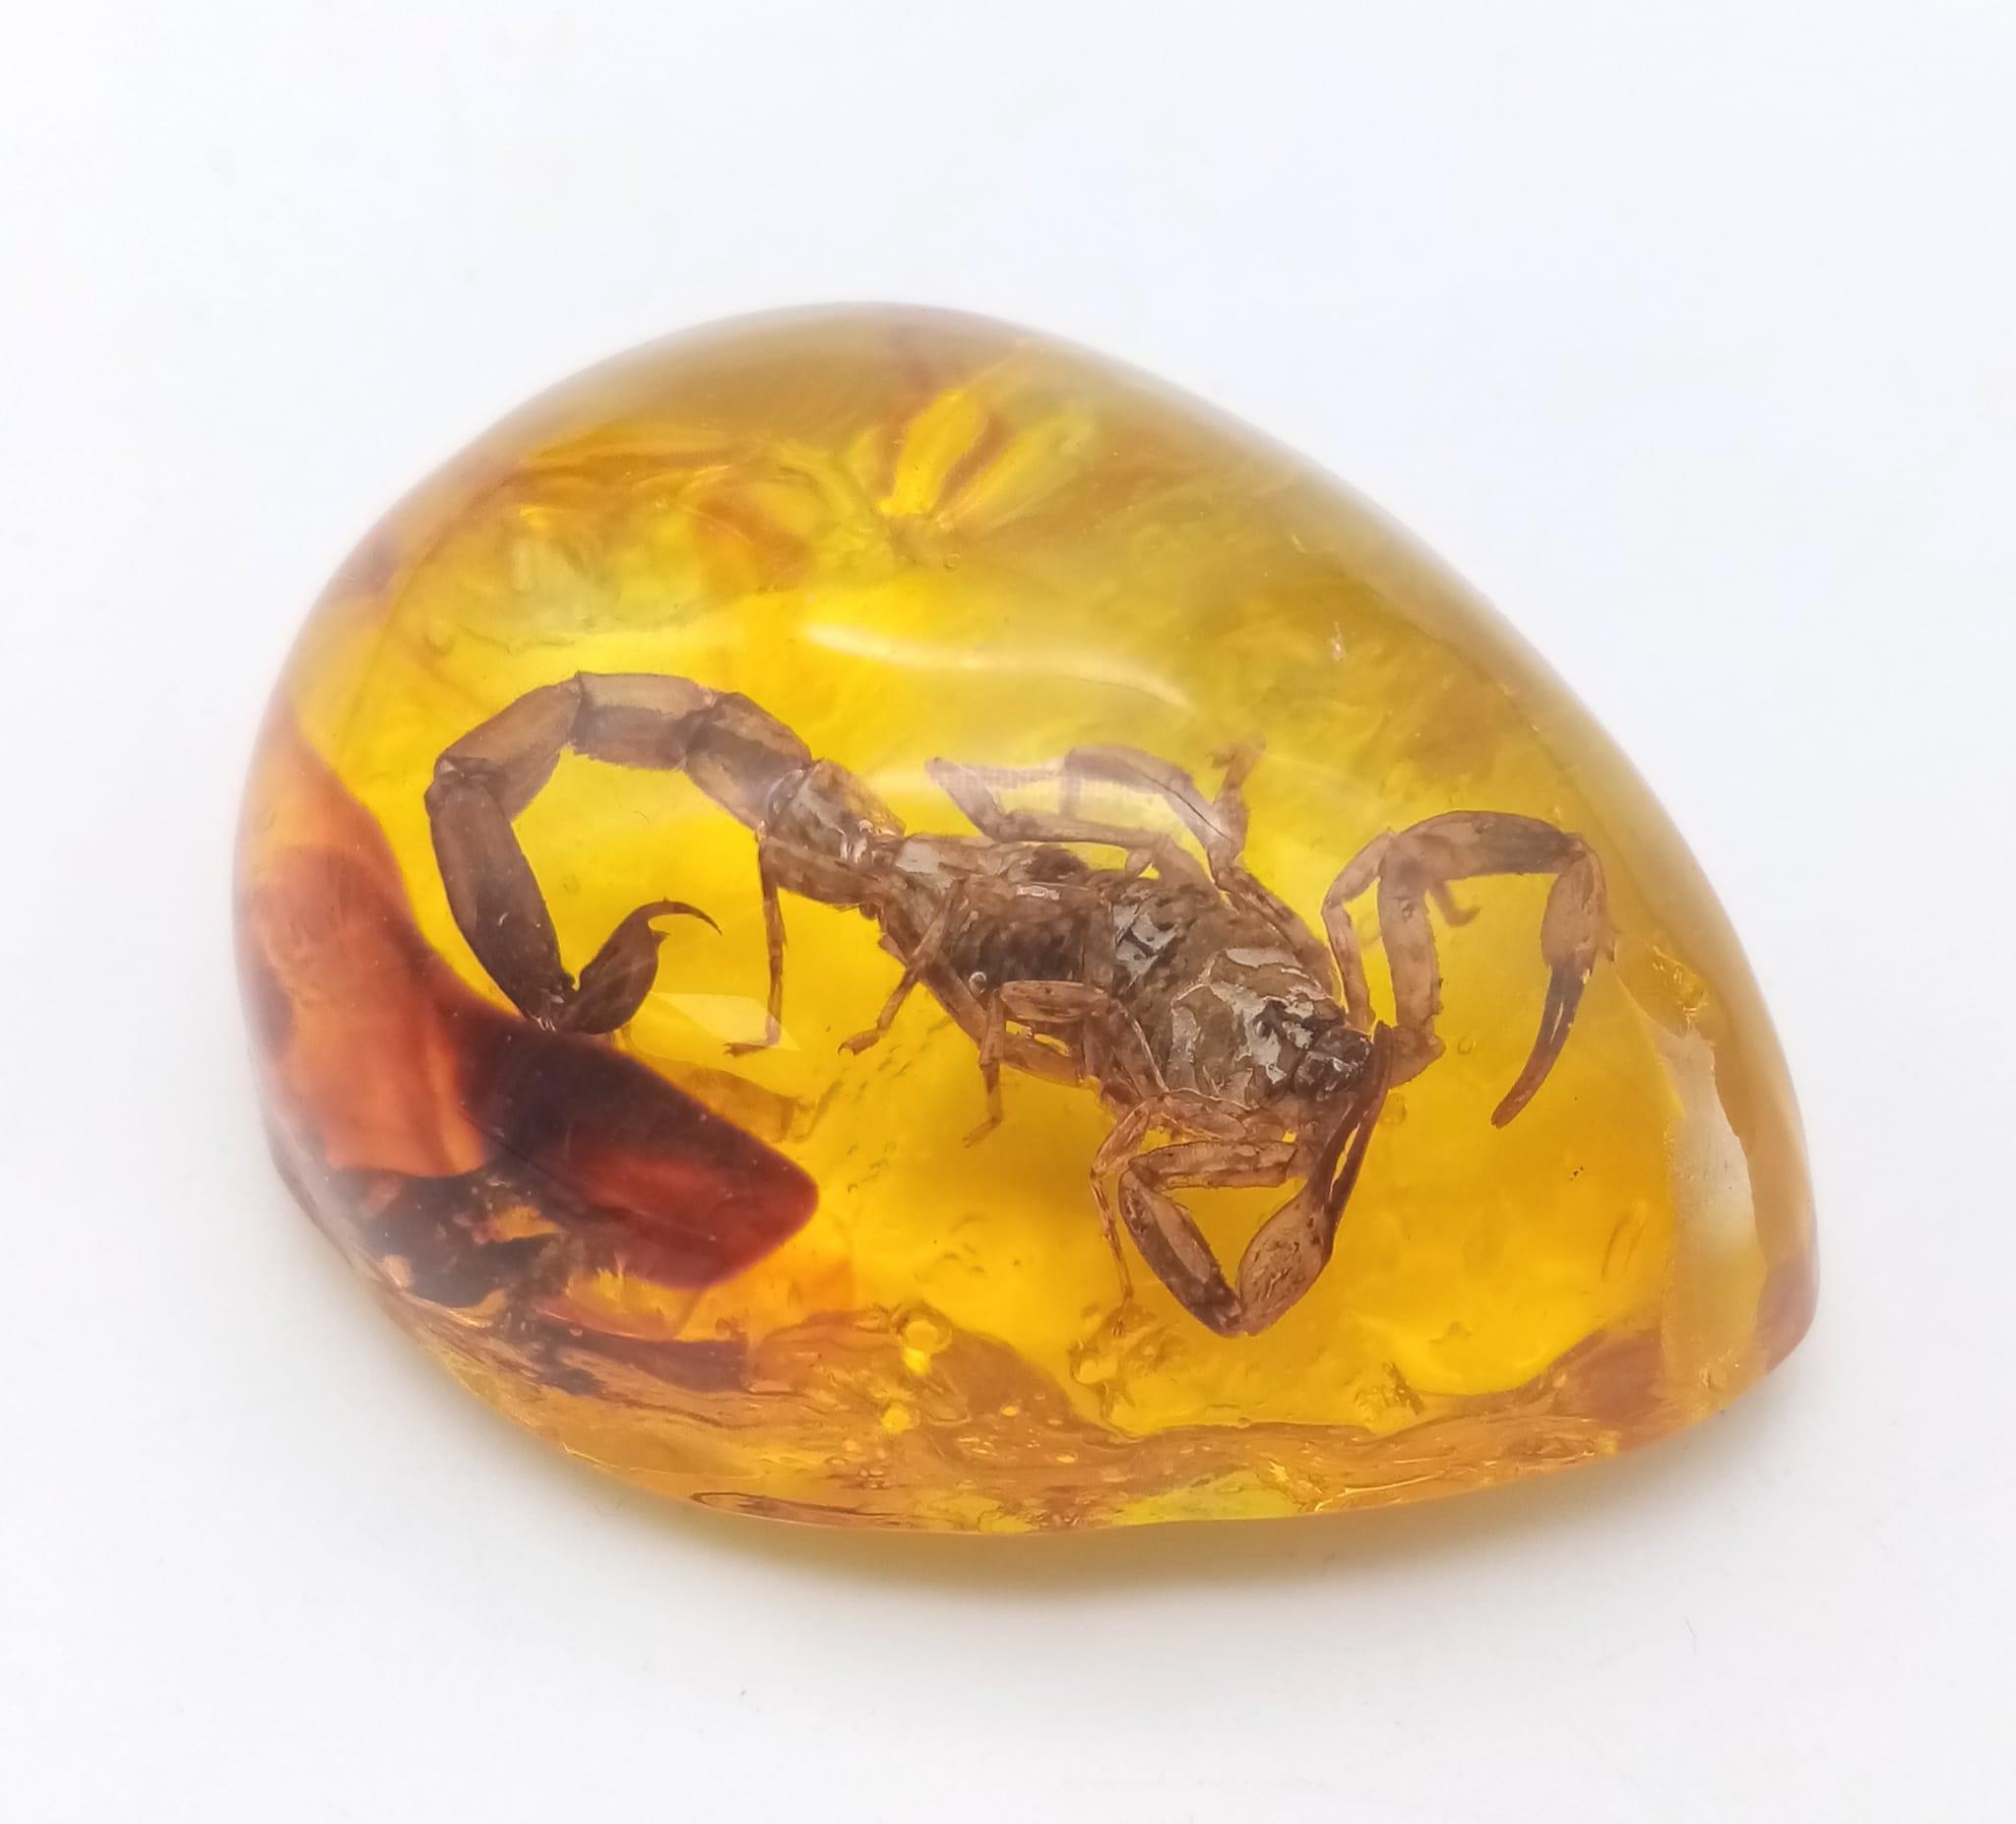 A Bitter and Angry Scorpion Trapped in the Complete Despair of Amber-Coloured Resin. Pendant or